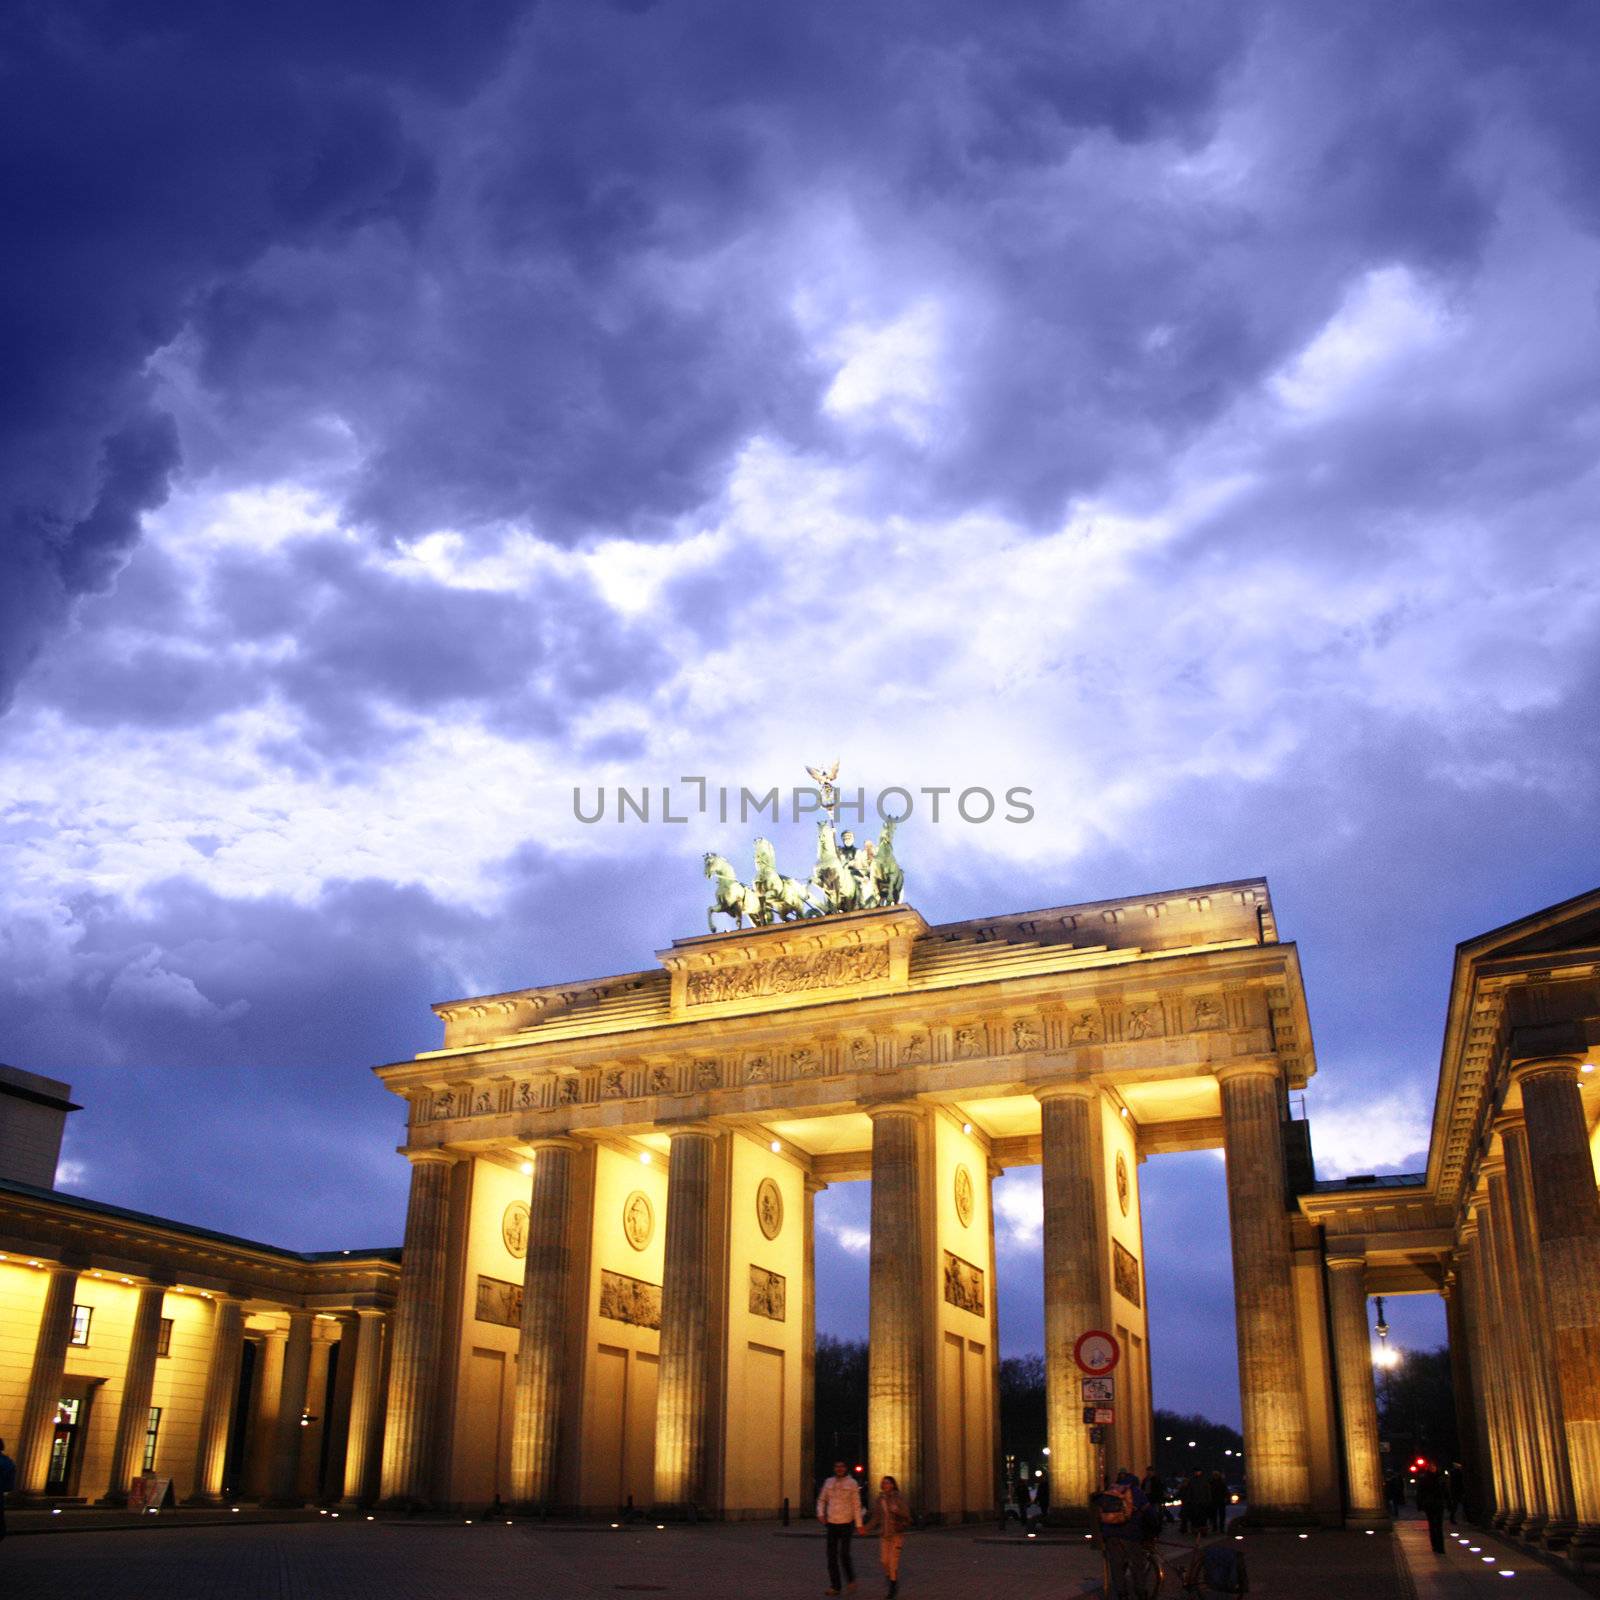 tourism in berlin by photochecker